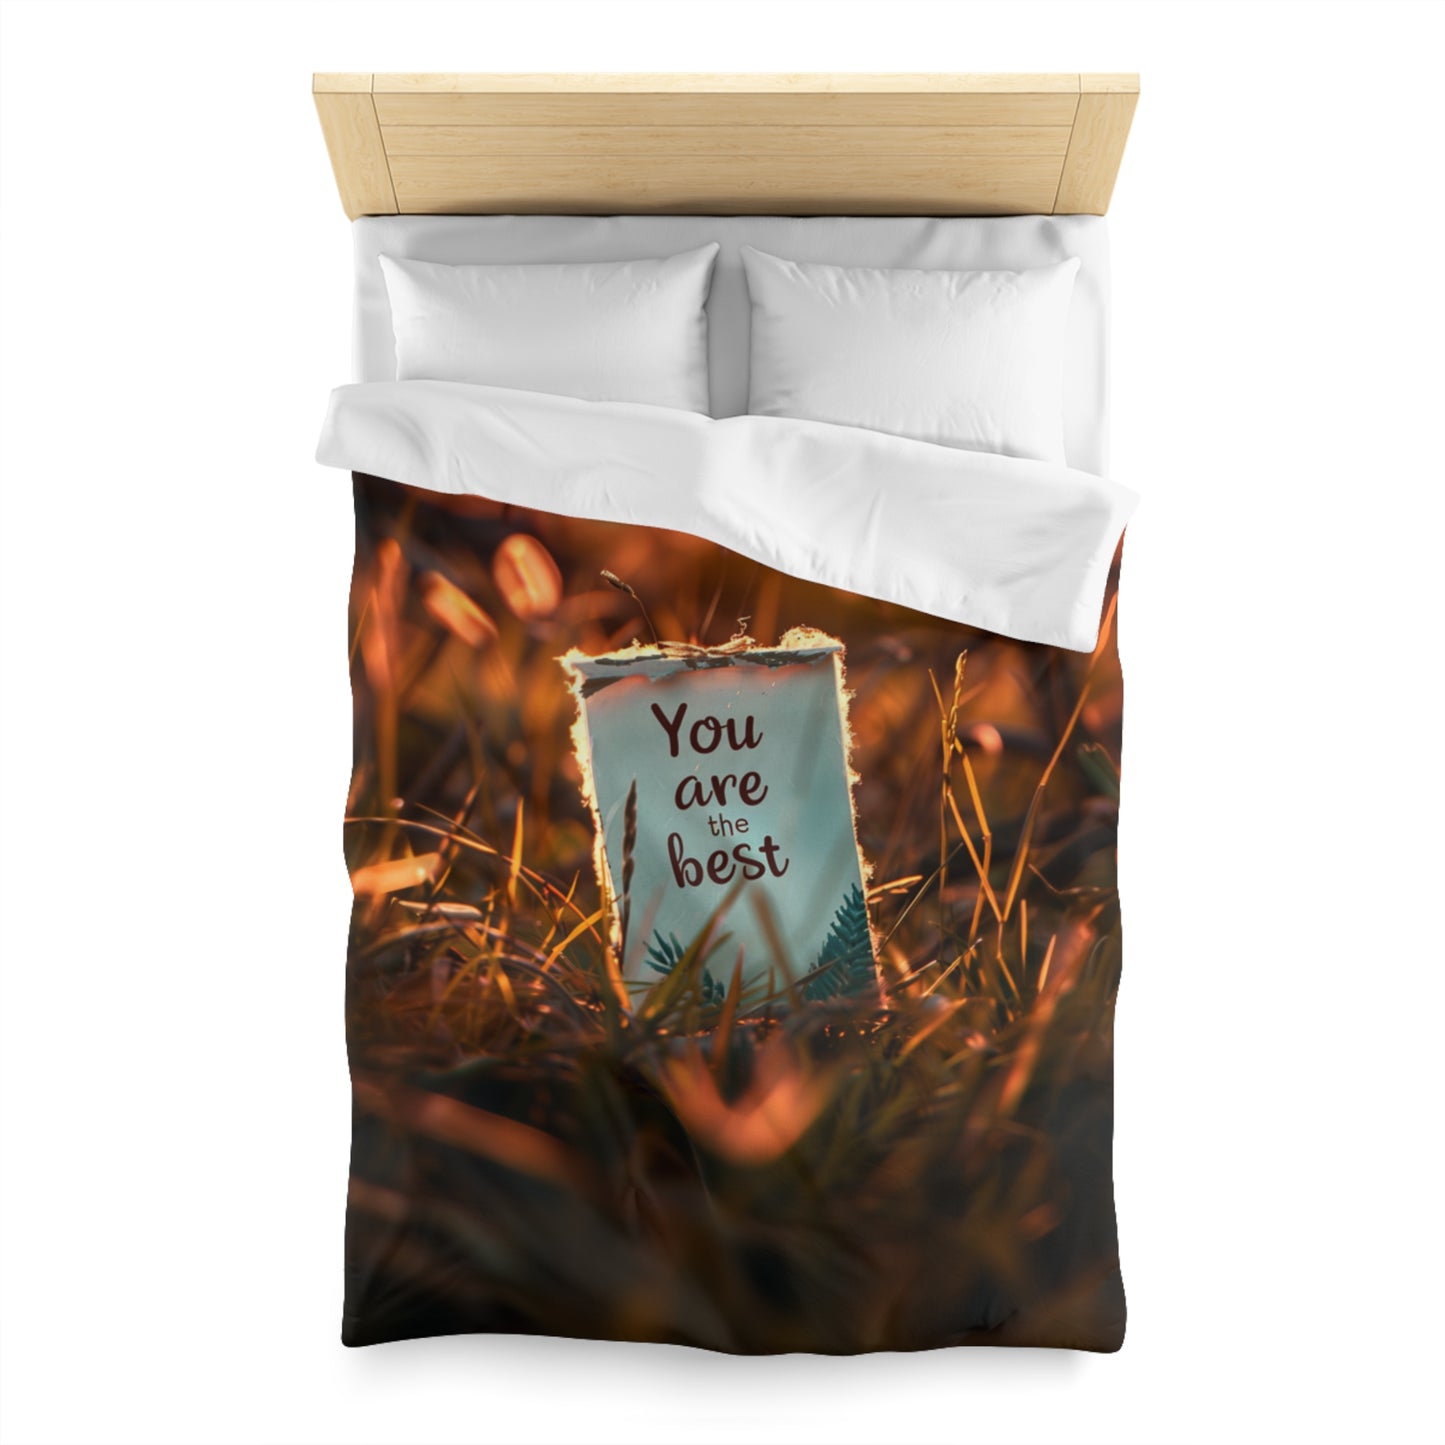 Microfiber Duvet Cover - You are the best 1